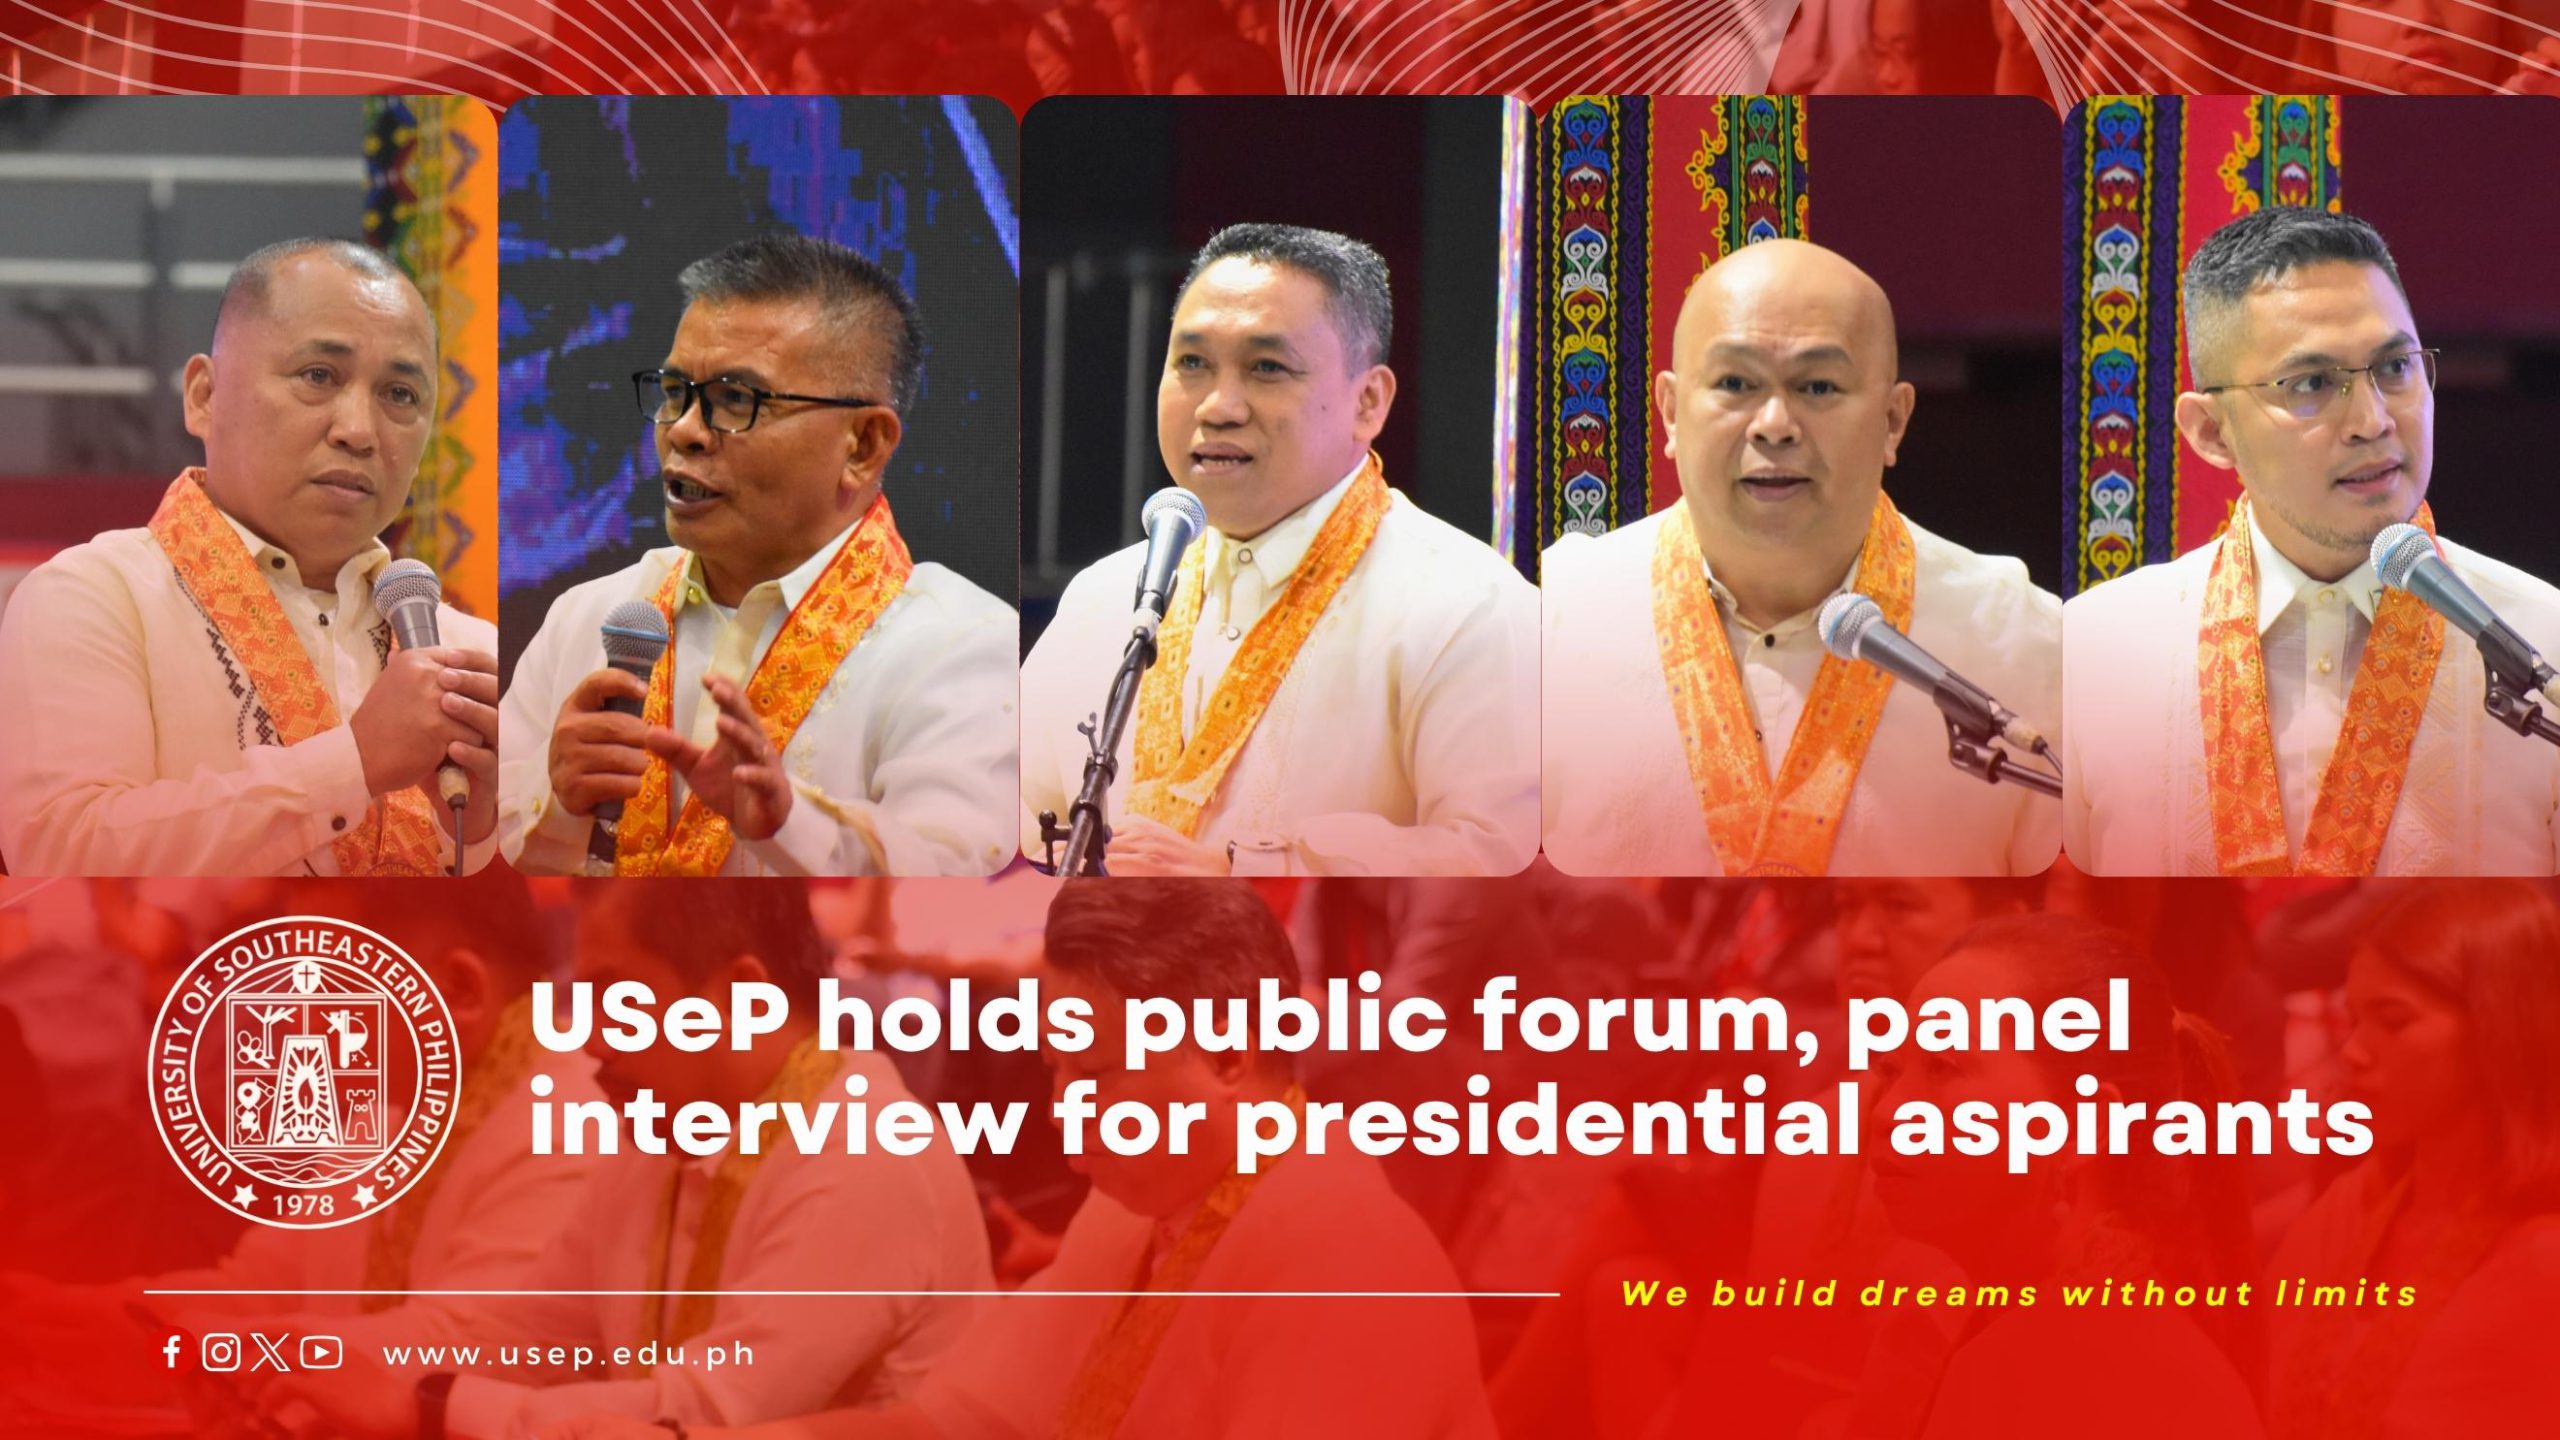 USeP holds public forum, panel interview for presidential aspirants